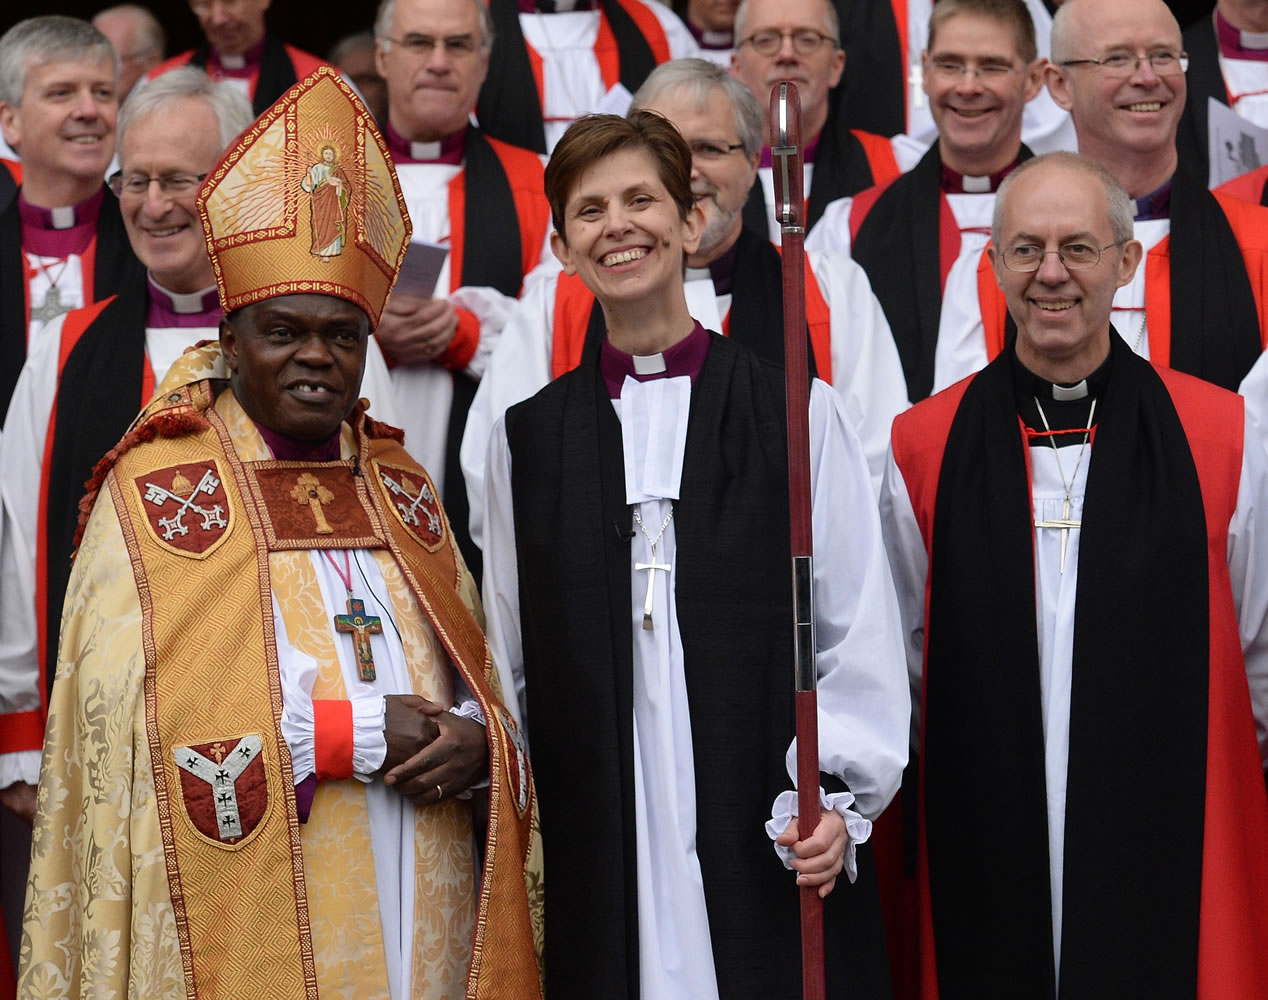 The Archbishop of York Dr.